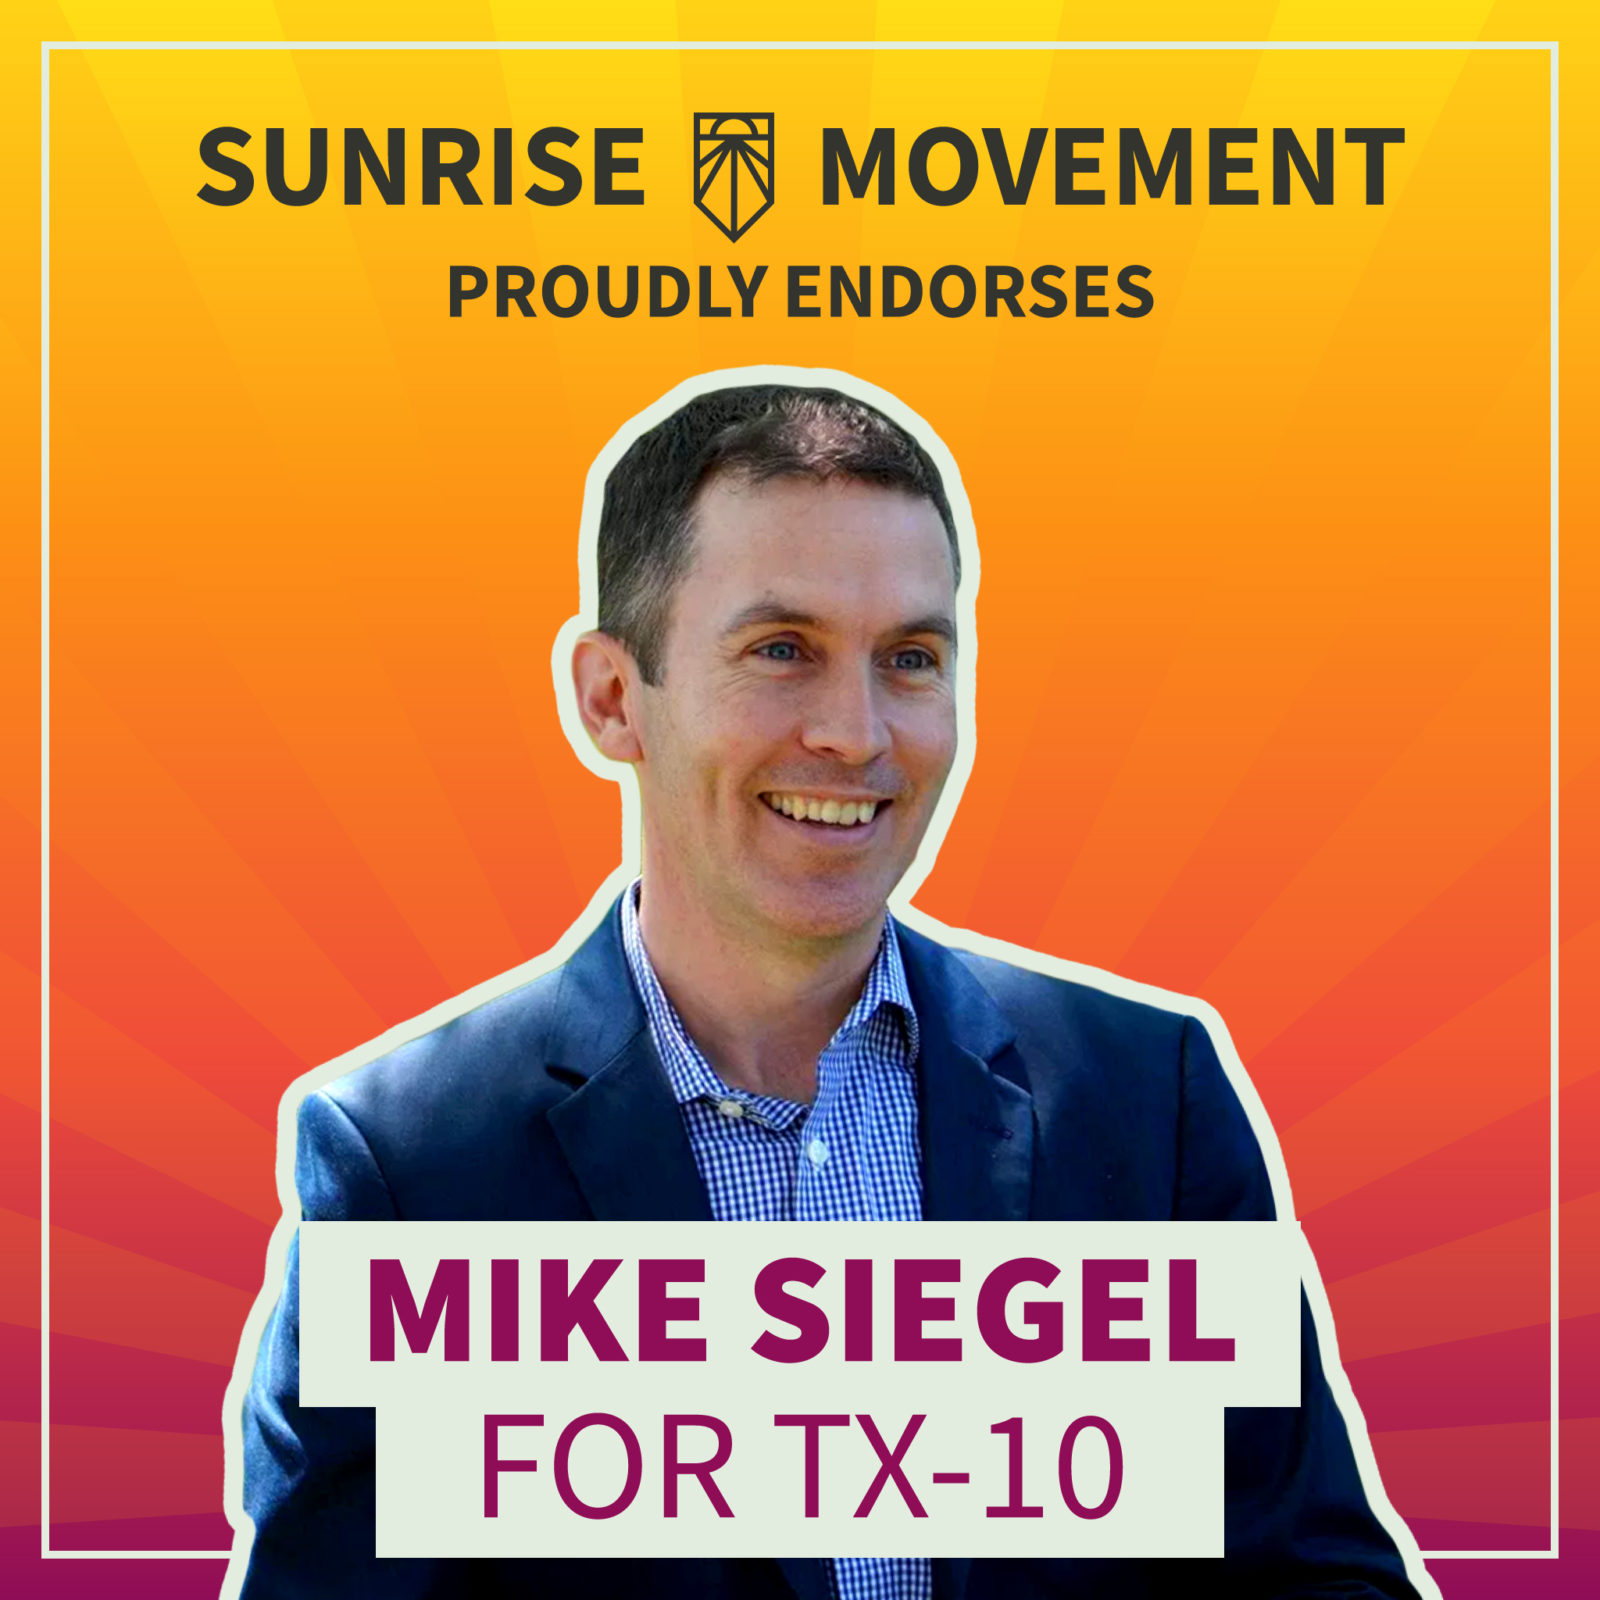 A photo of Mike Siegel with text: Sunrise Movement proudly endorses Mike Siegel for TX-10